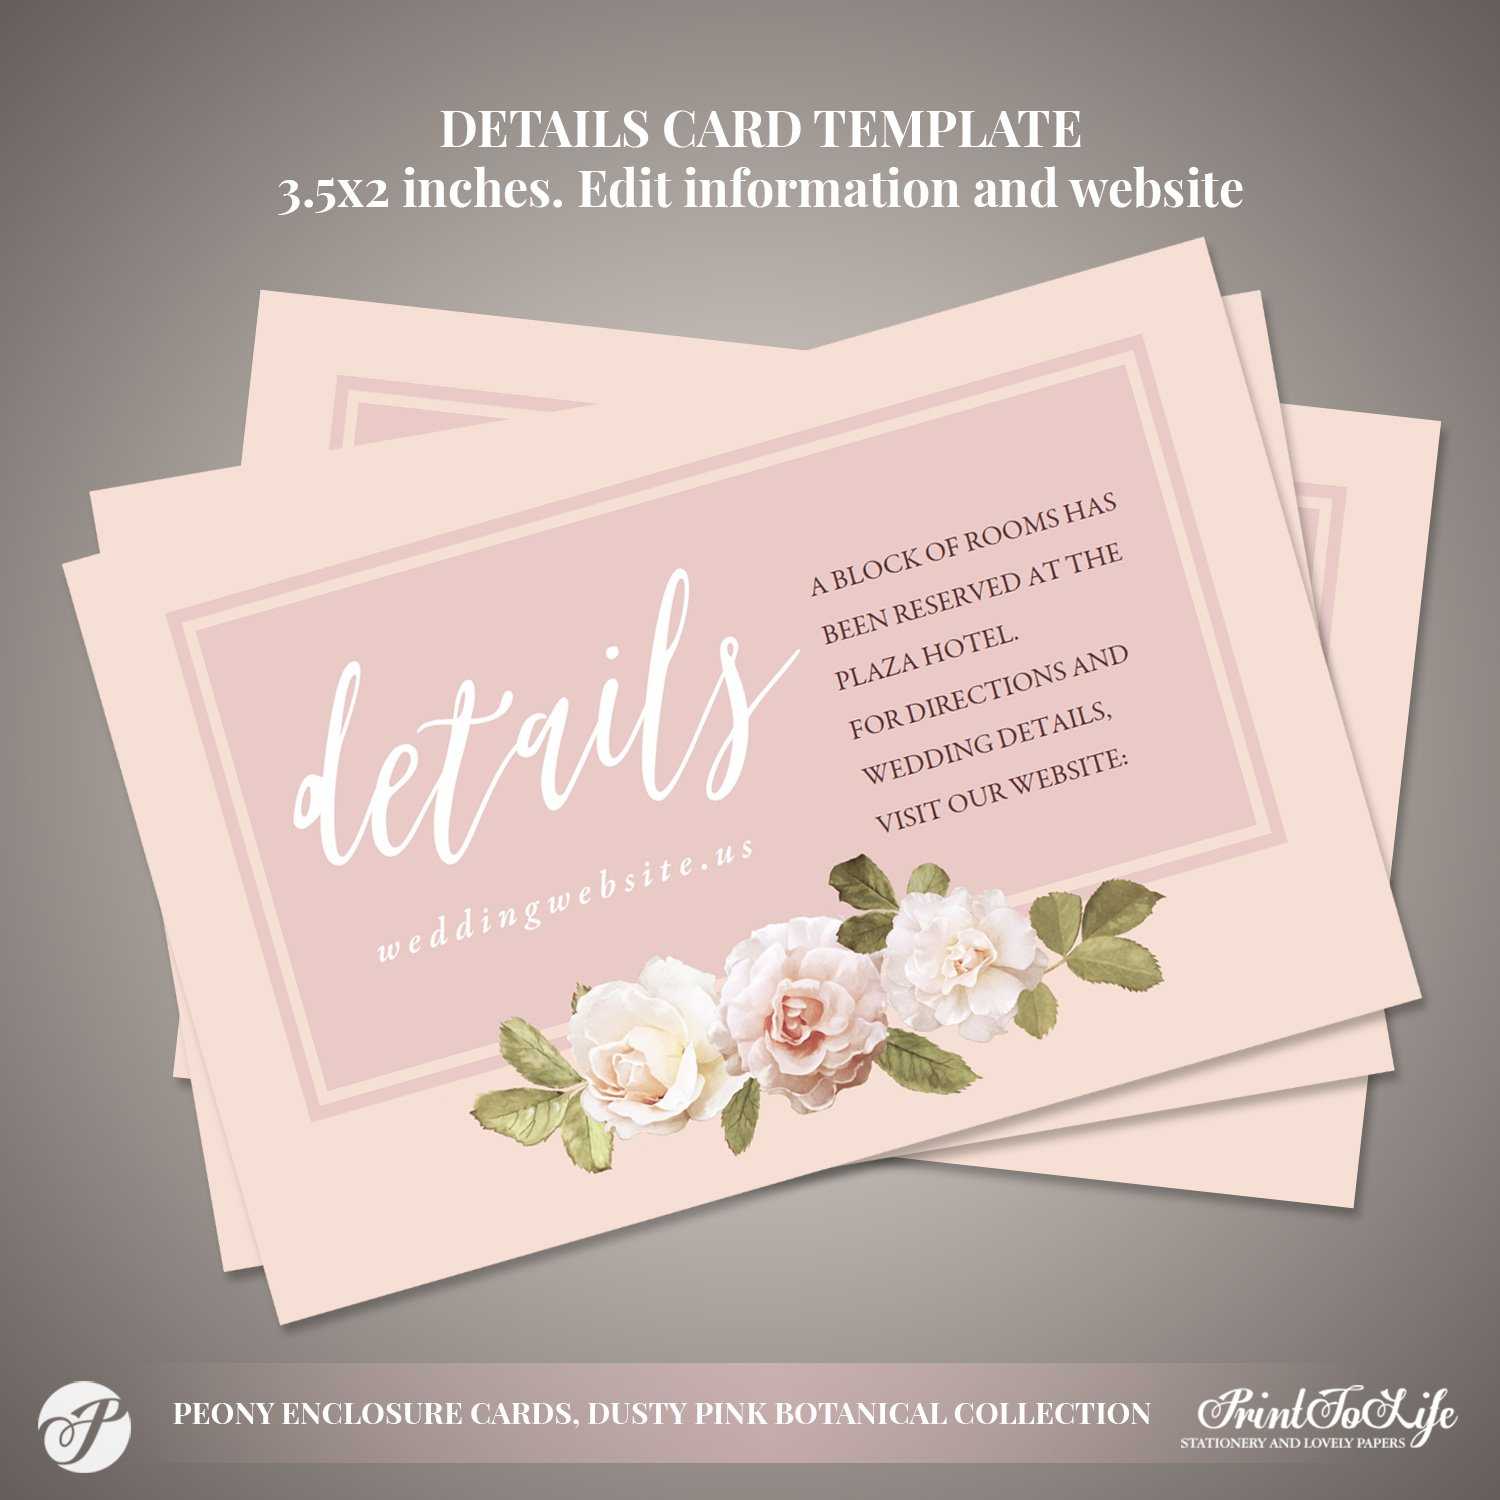 Peony Details Card, Wedding Information Card #dusty Pink Botanical  Collection With Regard To Wedding Hotel Information Card Template